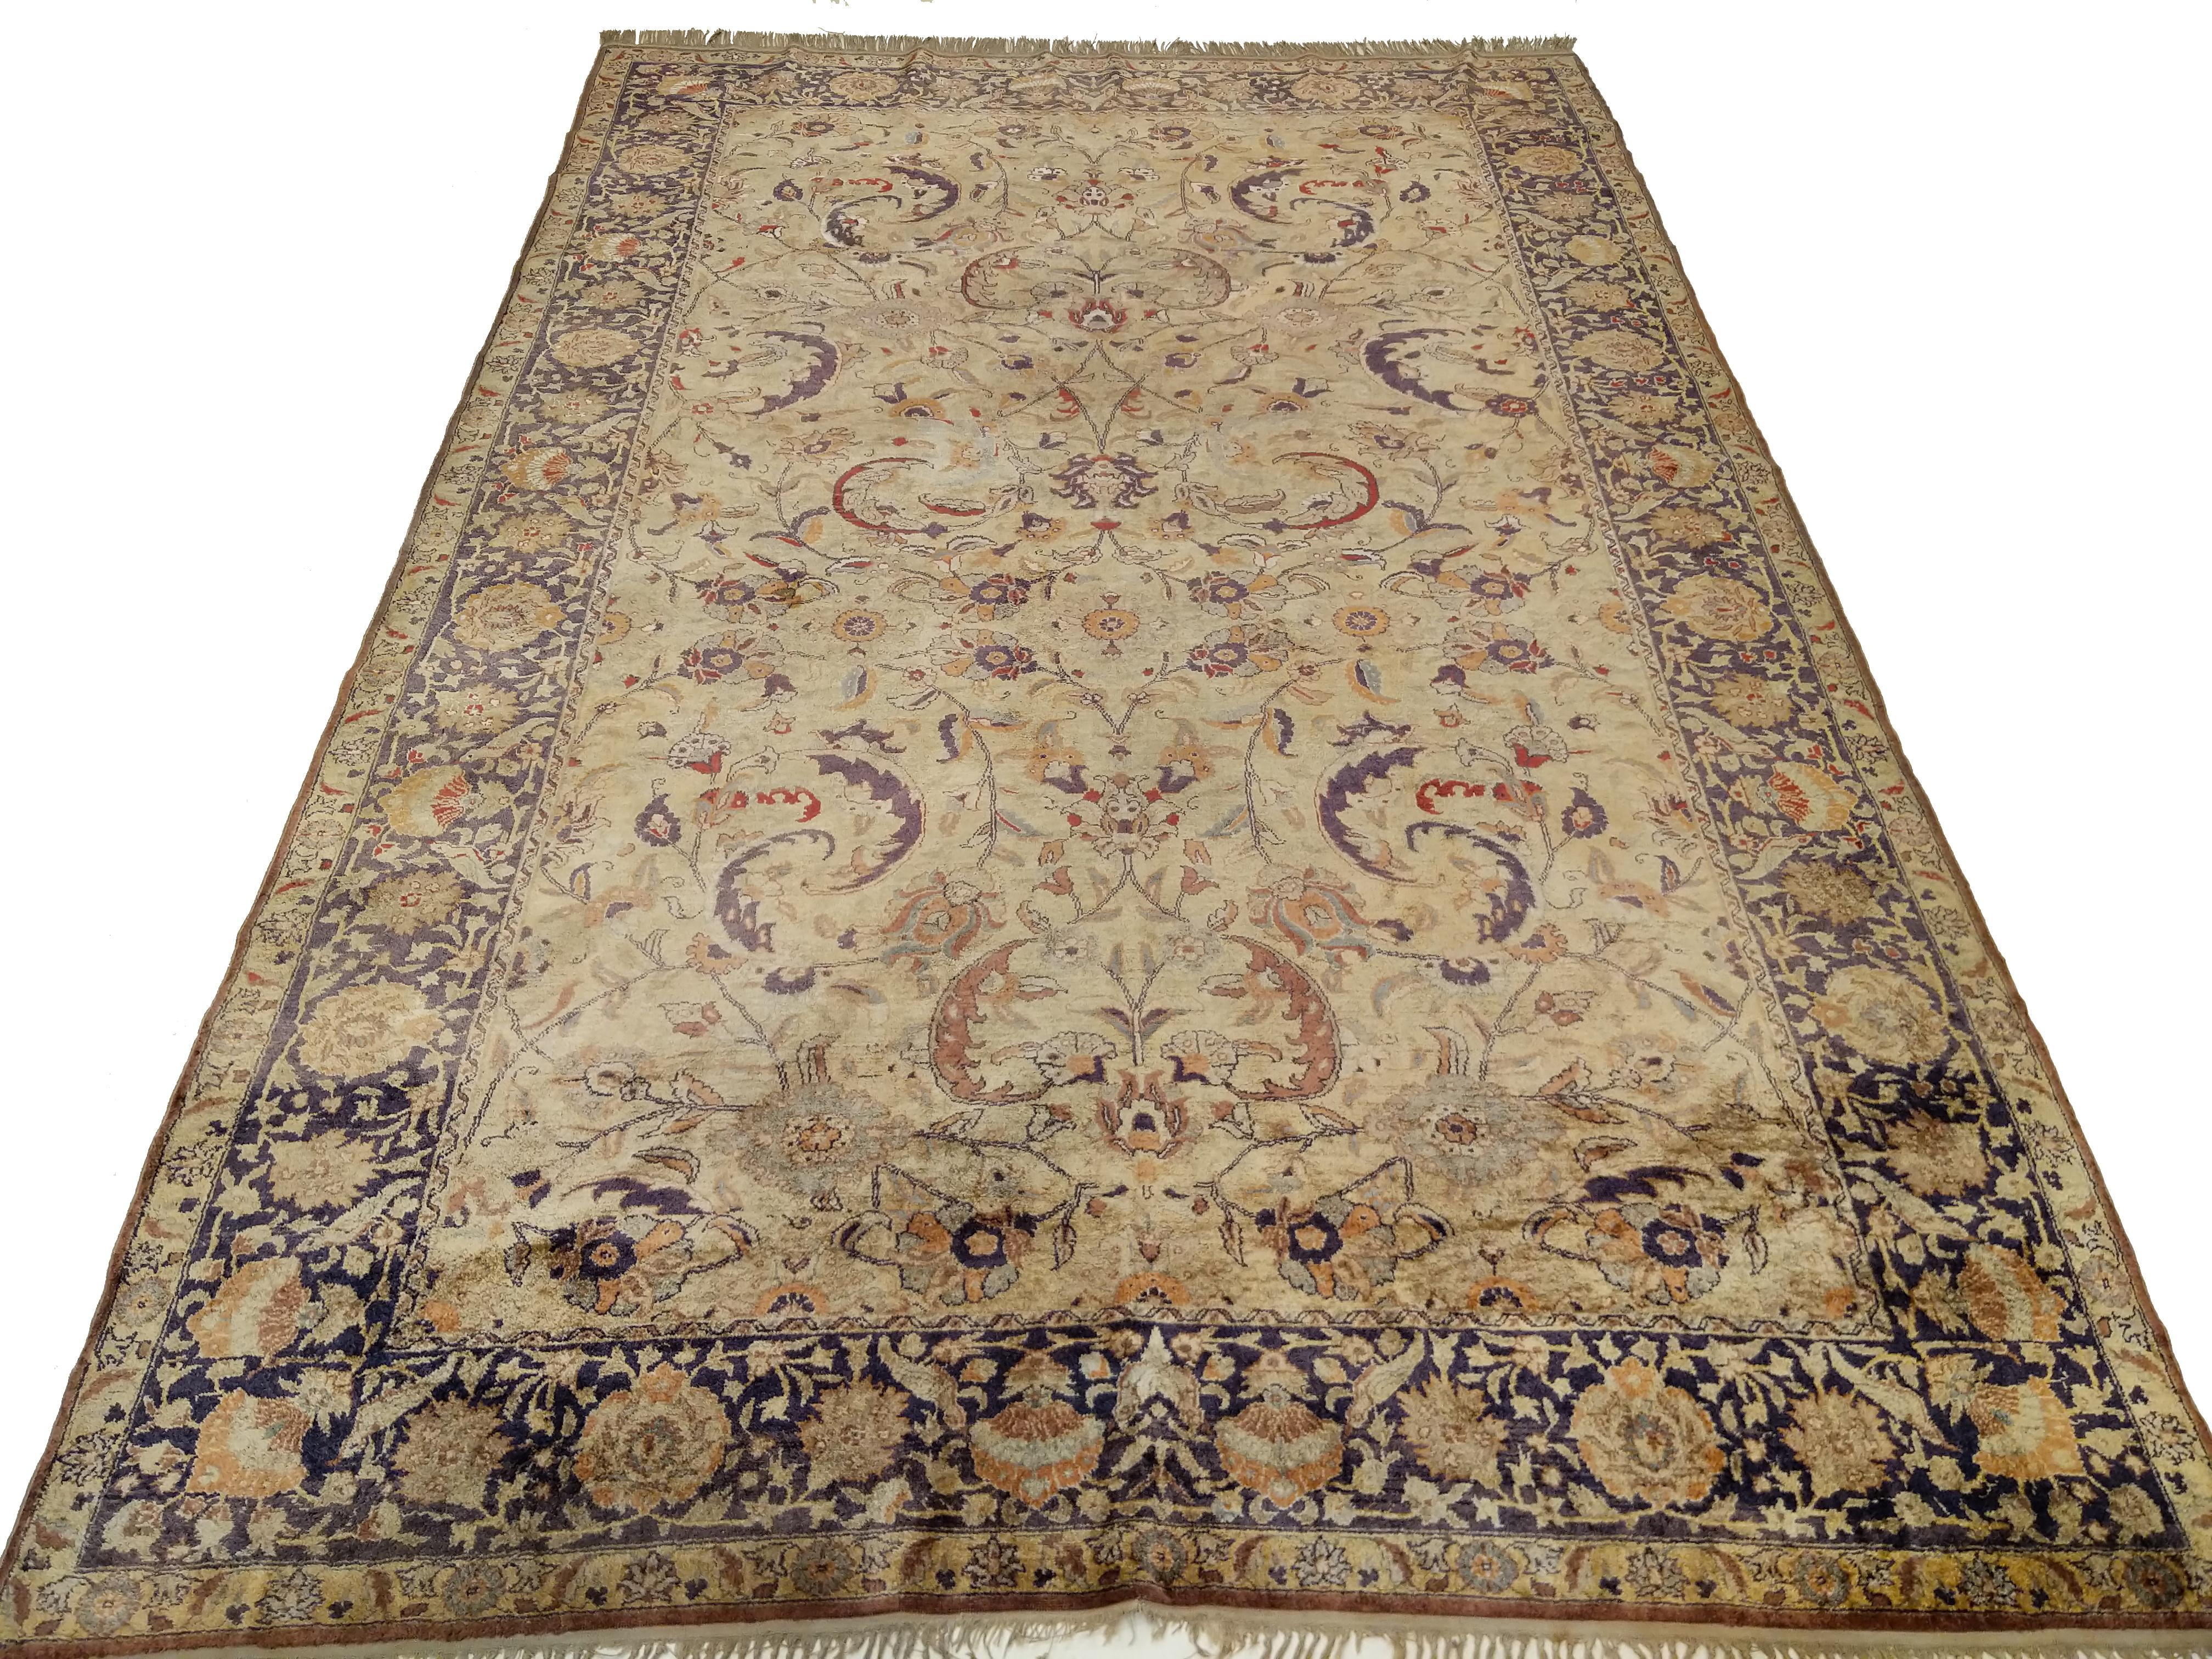 A very finely woven Kayseri rug from eastern Anatolia, hand knotted entirely in pure silk, distinguished by an all over pattern of stylized leafs and palmettes on an ivory background. The amazing condition of the rug allows us to enjoy the beauty